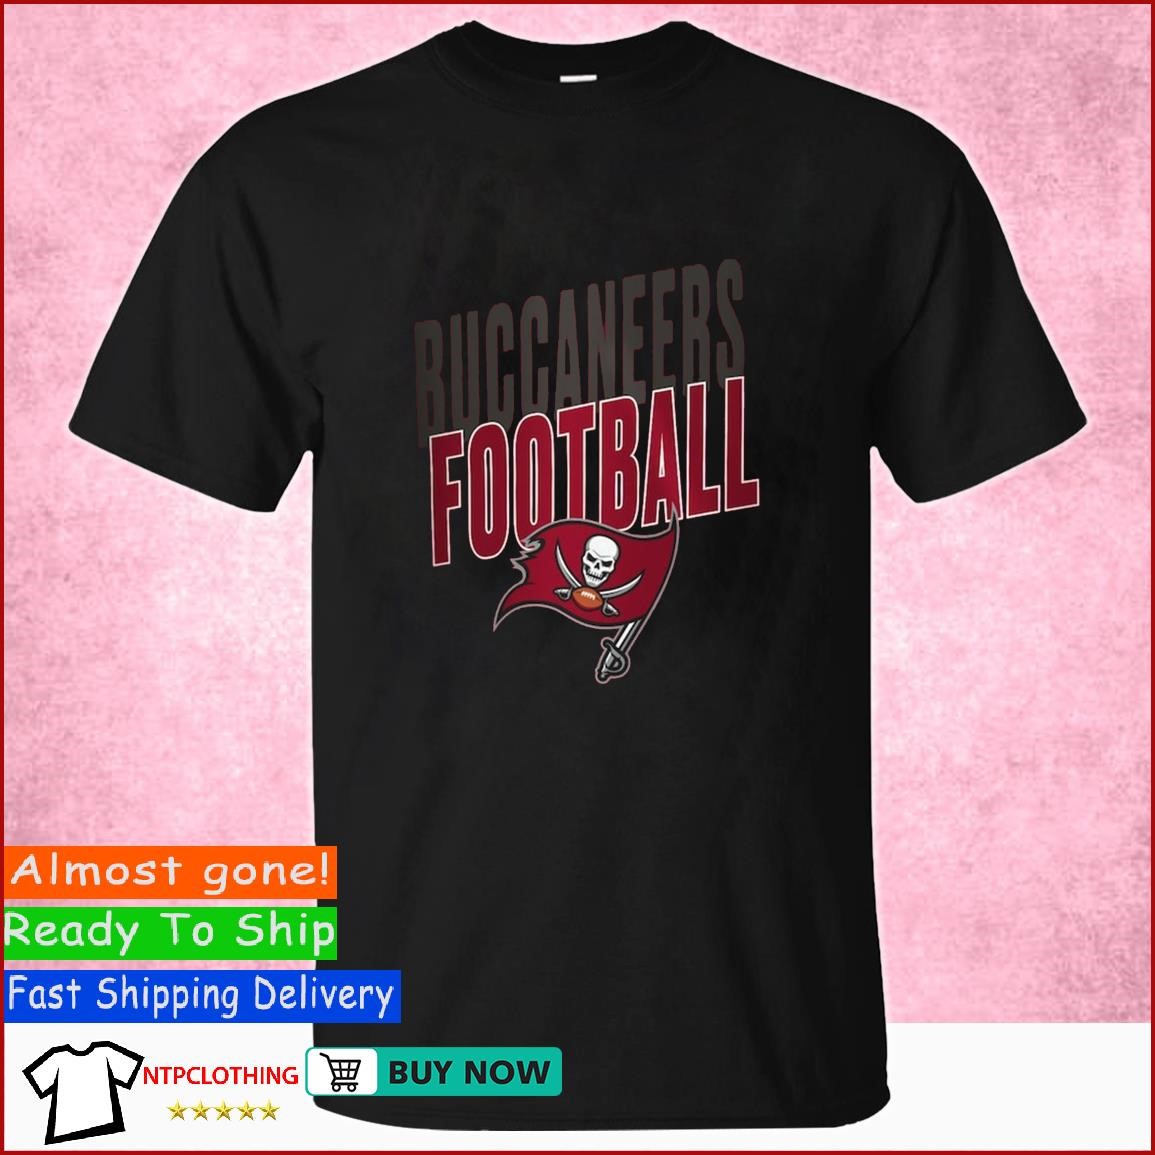 buccaneers youth shirt